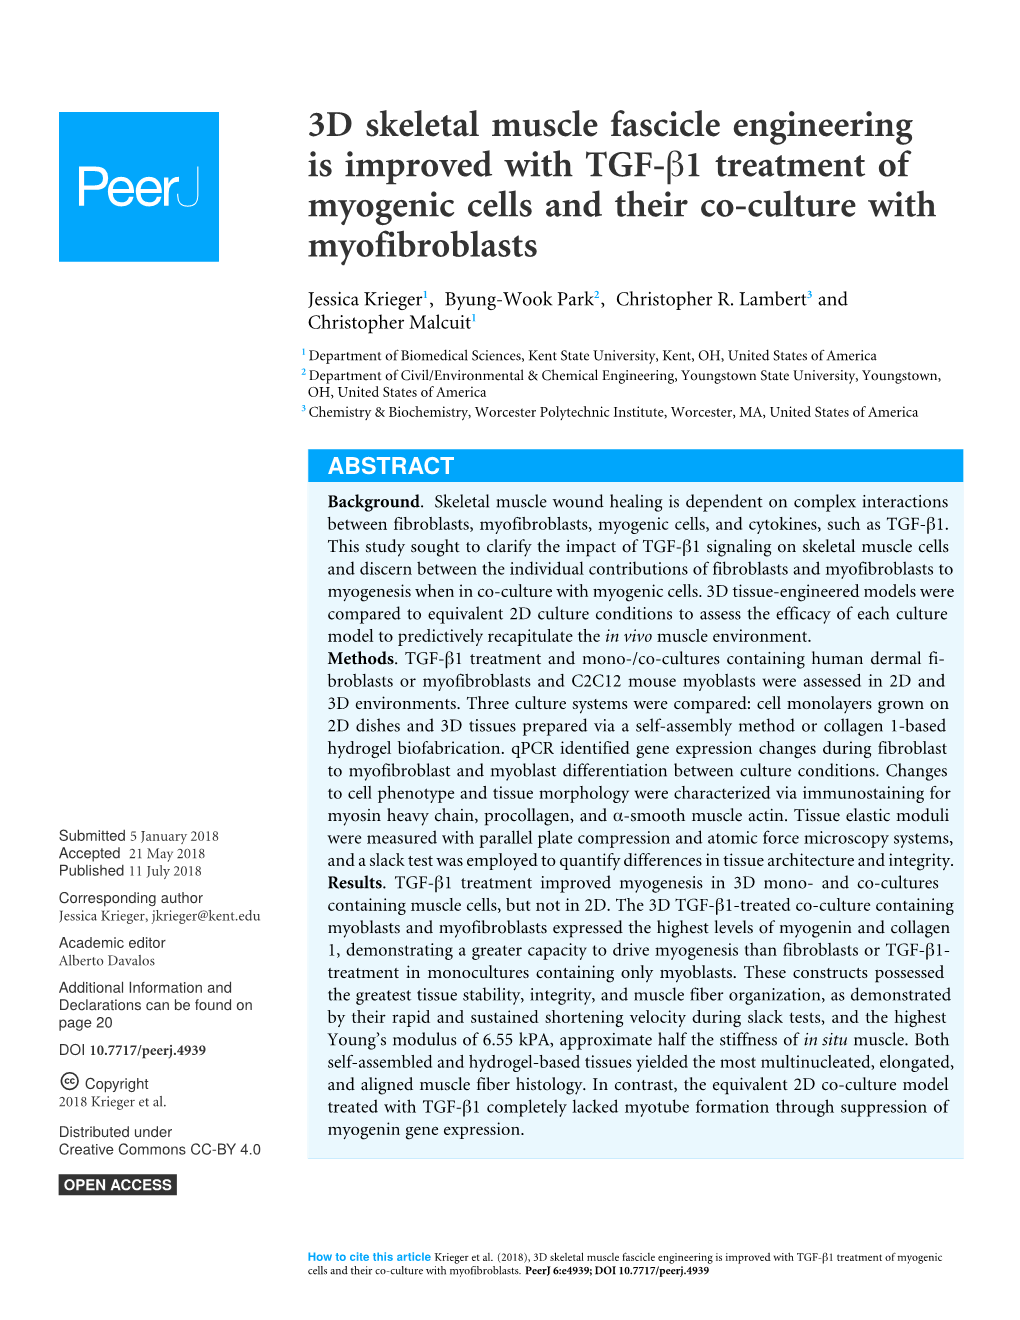 3D Skeletal Muscle Fascicle Engineering Is Improved with TGF-Β1 Treatment of Myogenic Cells and Their Co-Culture with Myofibroblasts